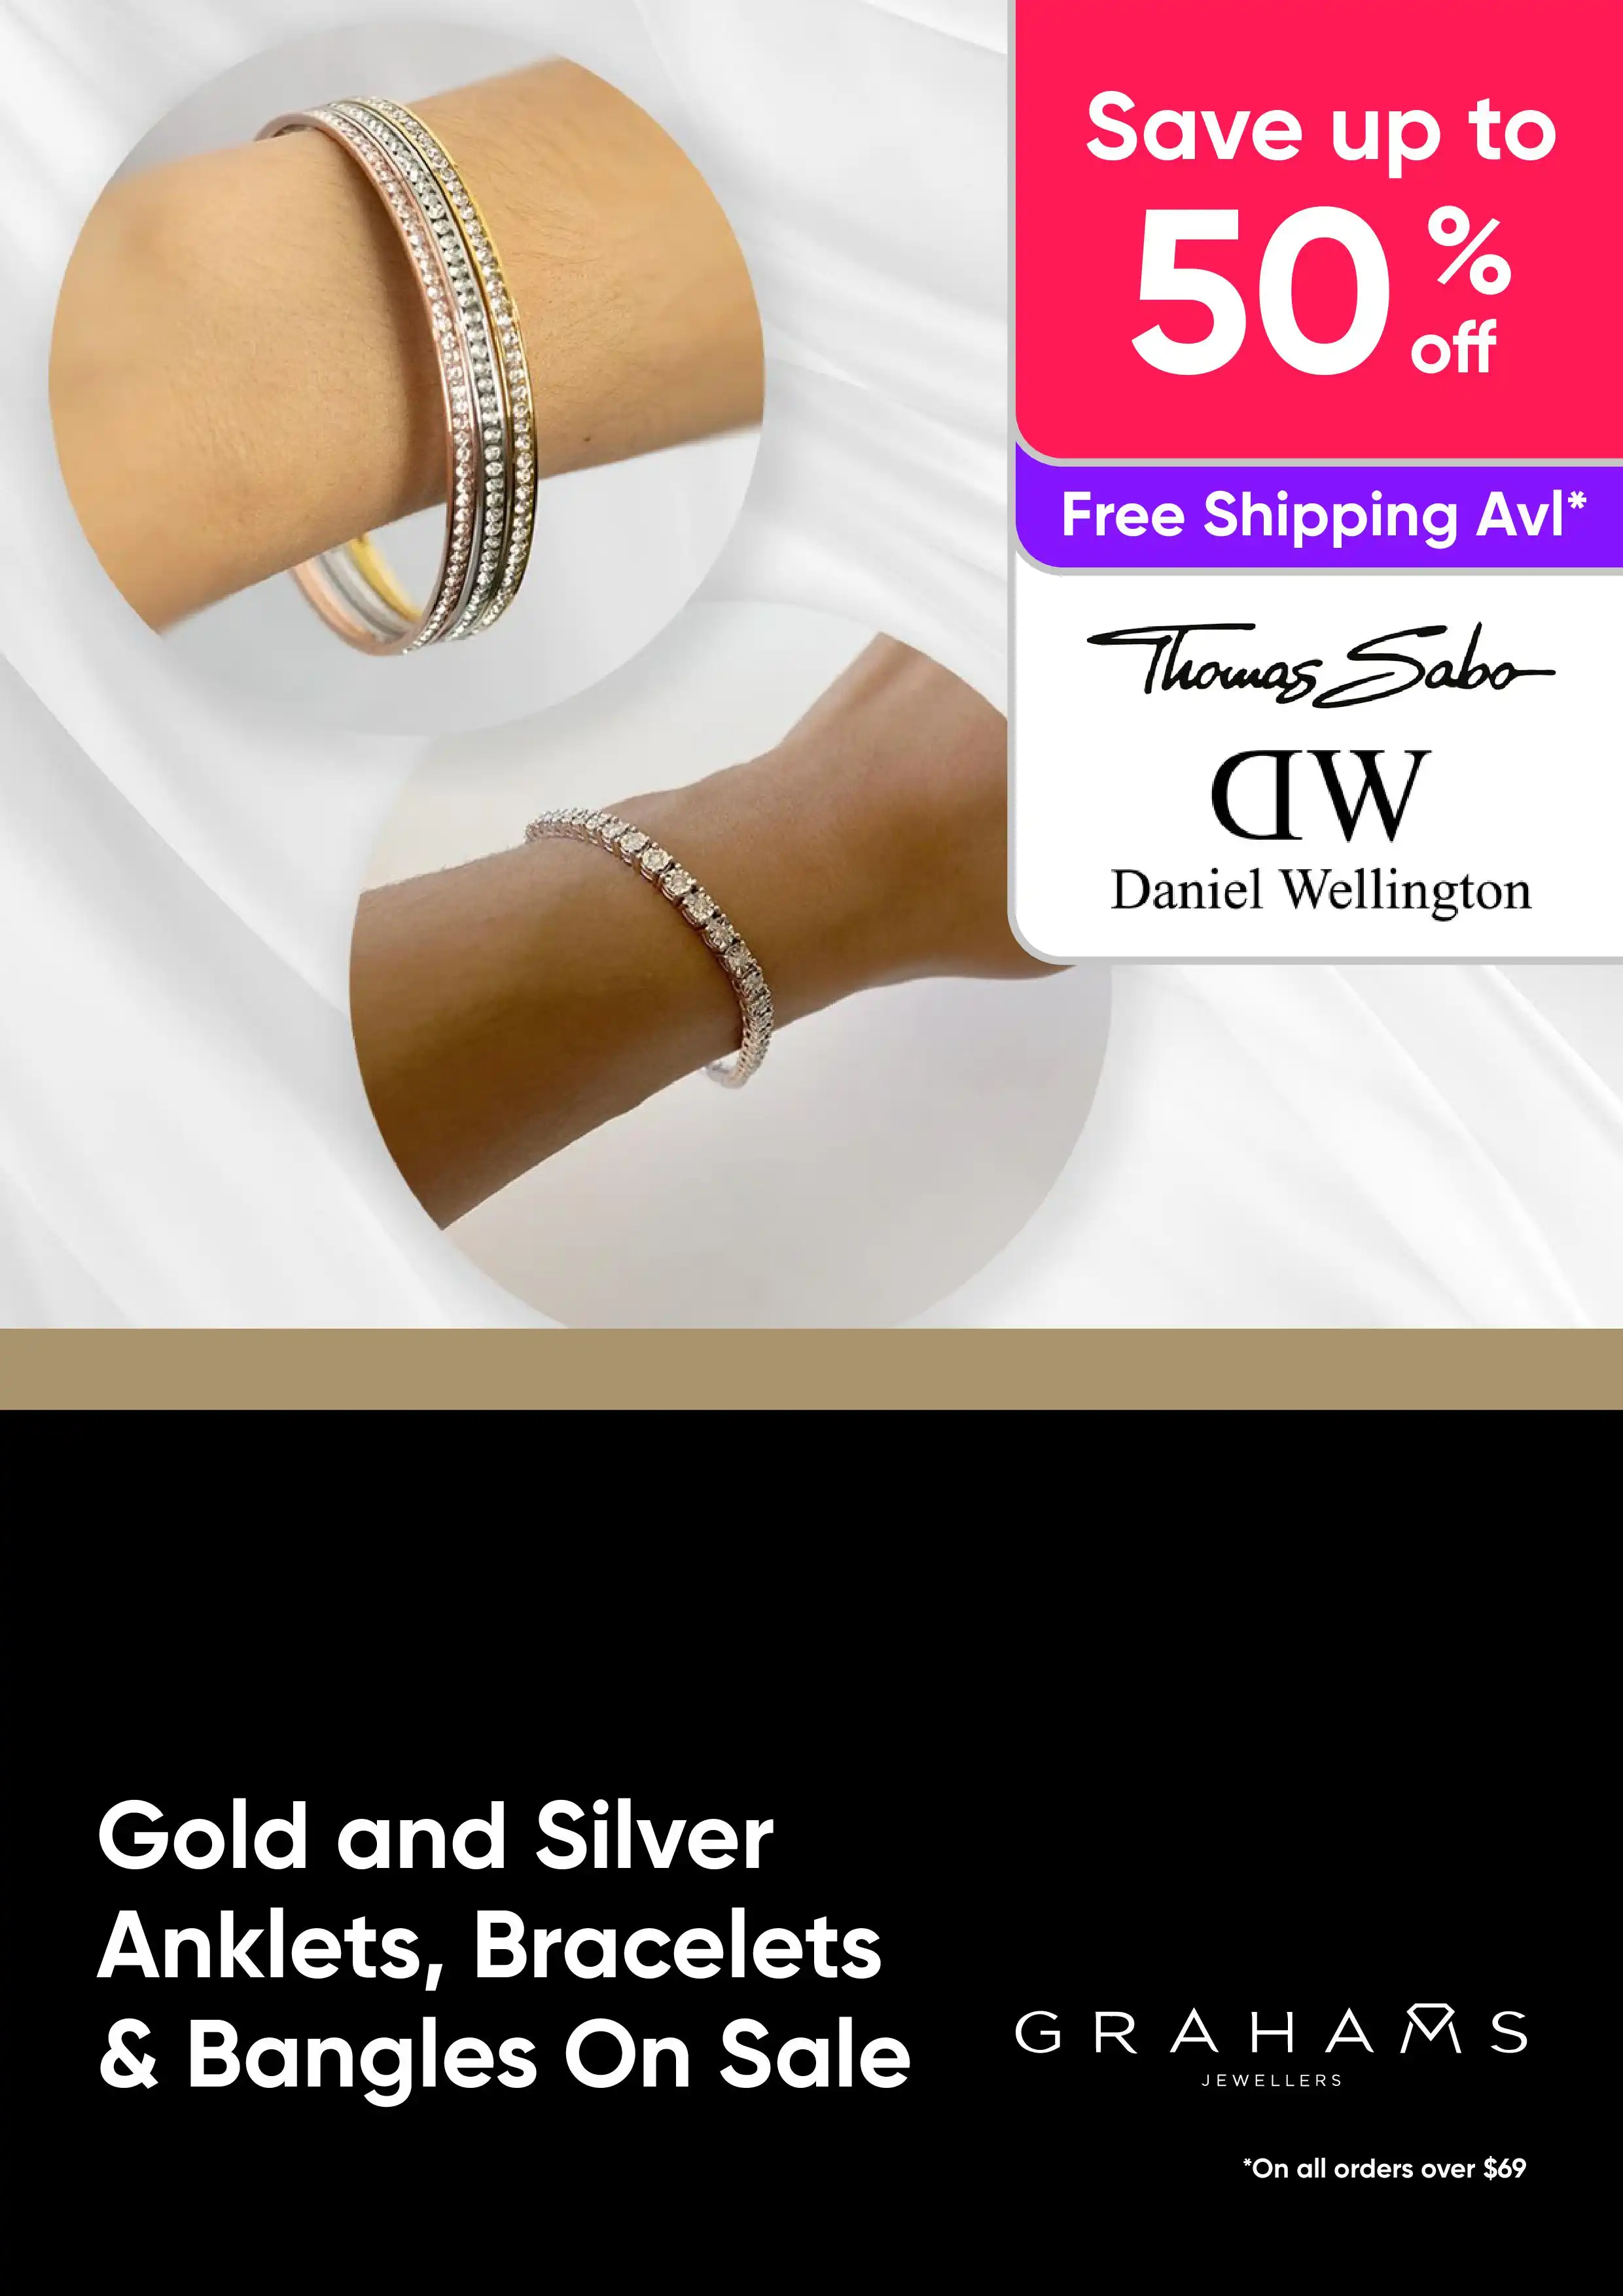 Gold and Silver Anklets, Bracelets & Bangles On Sale - Save Up to 50% Off